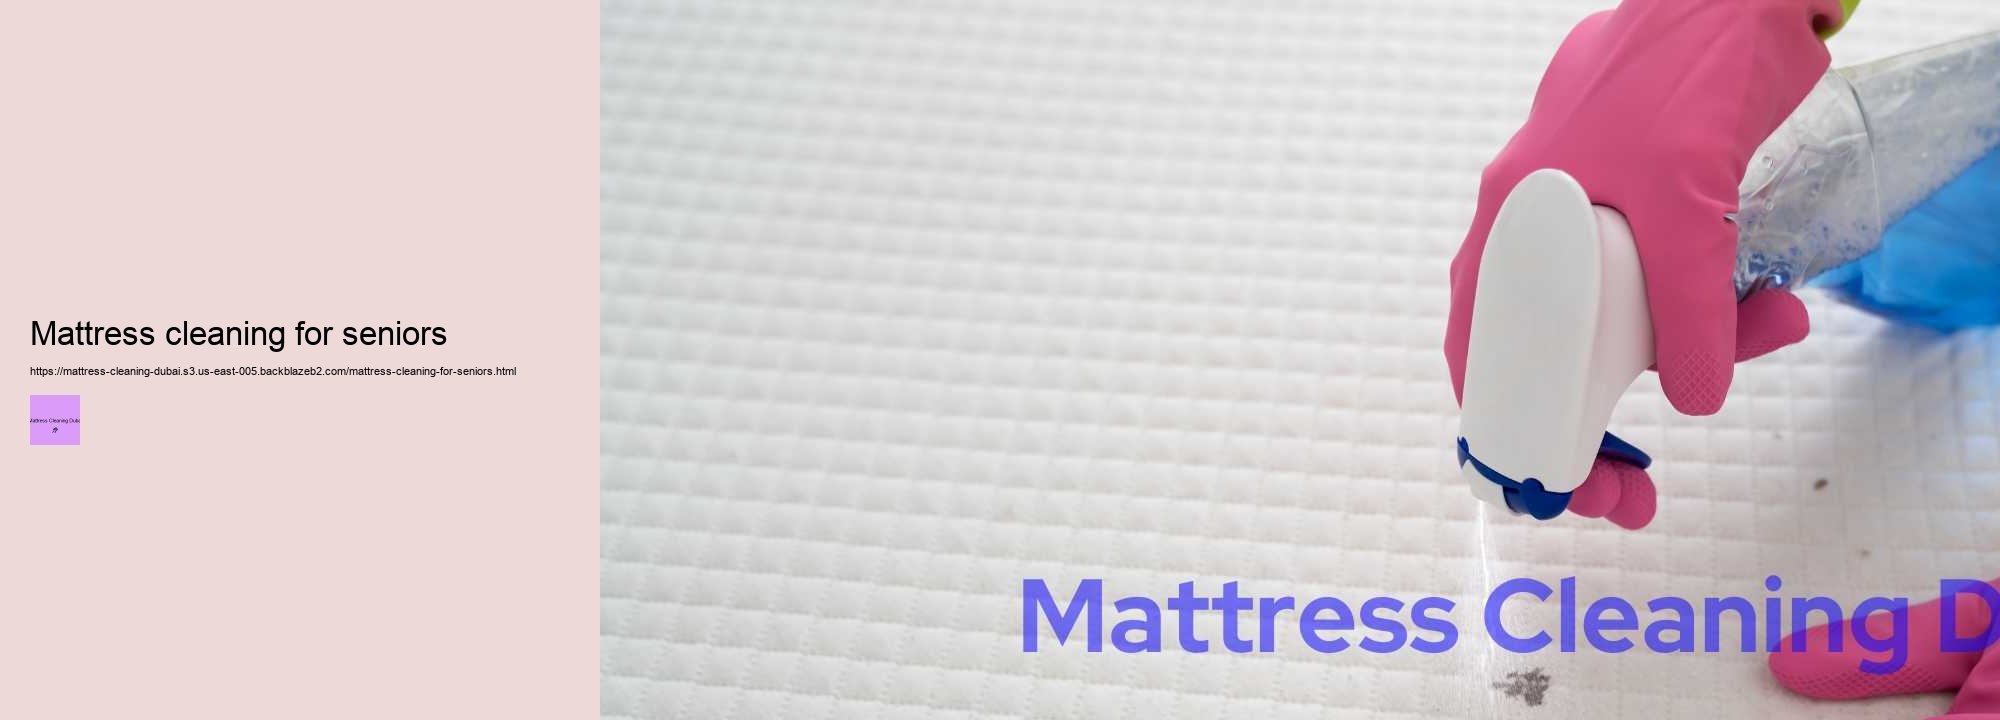 Mattress cleaning for seniors